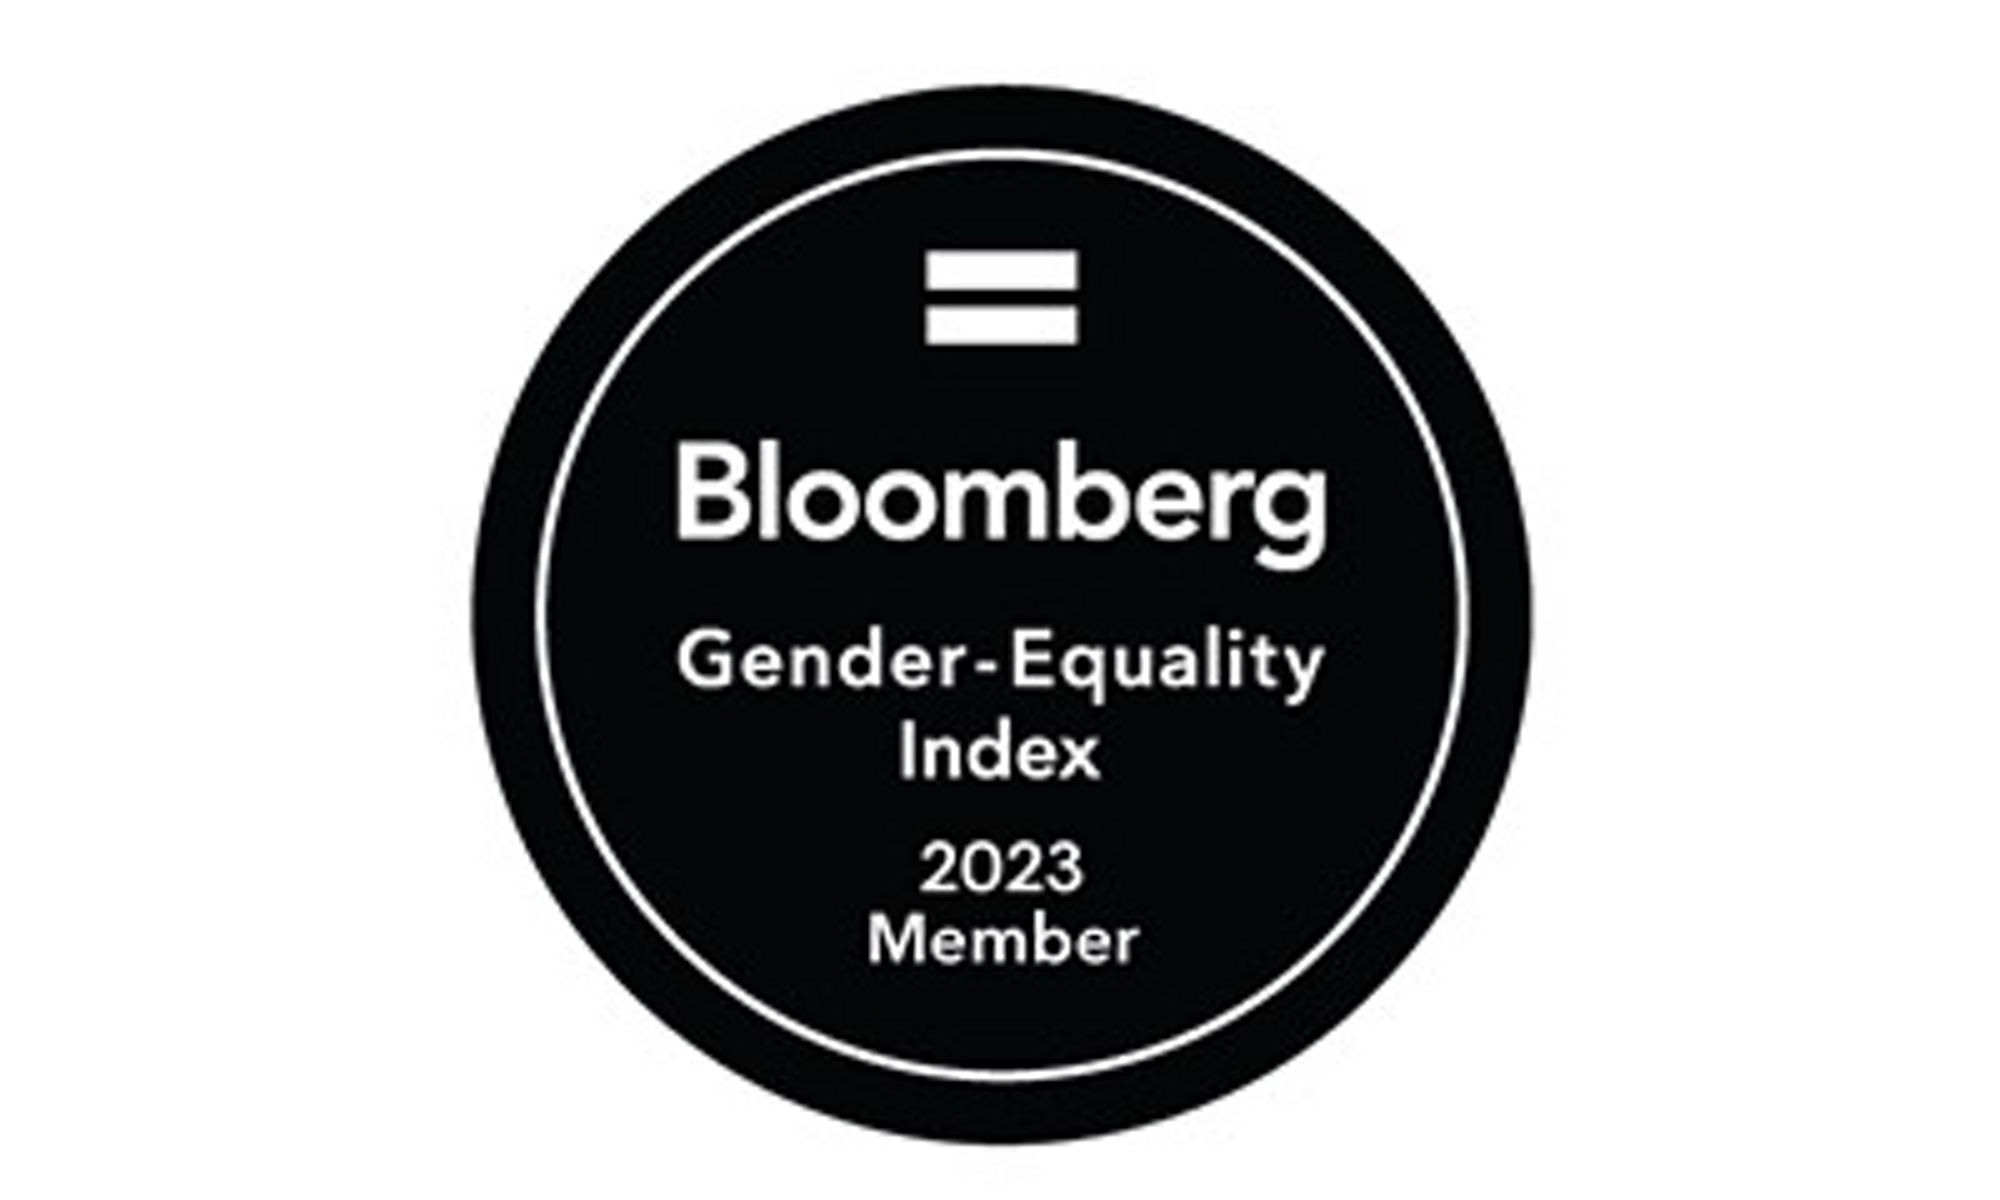 Bloomberg Gender-Equality Index award icon